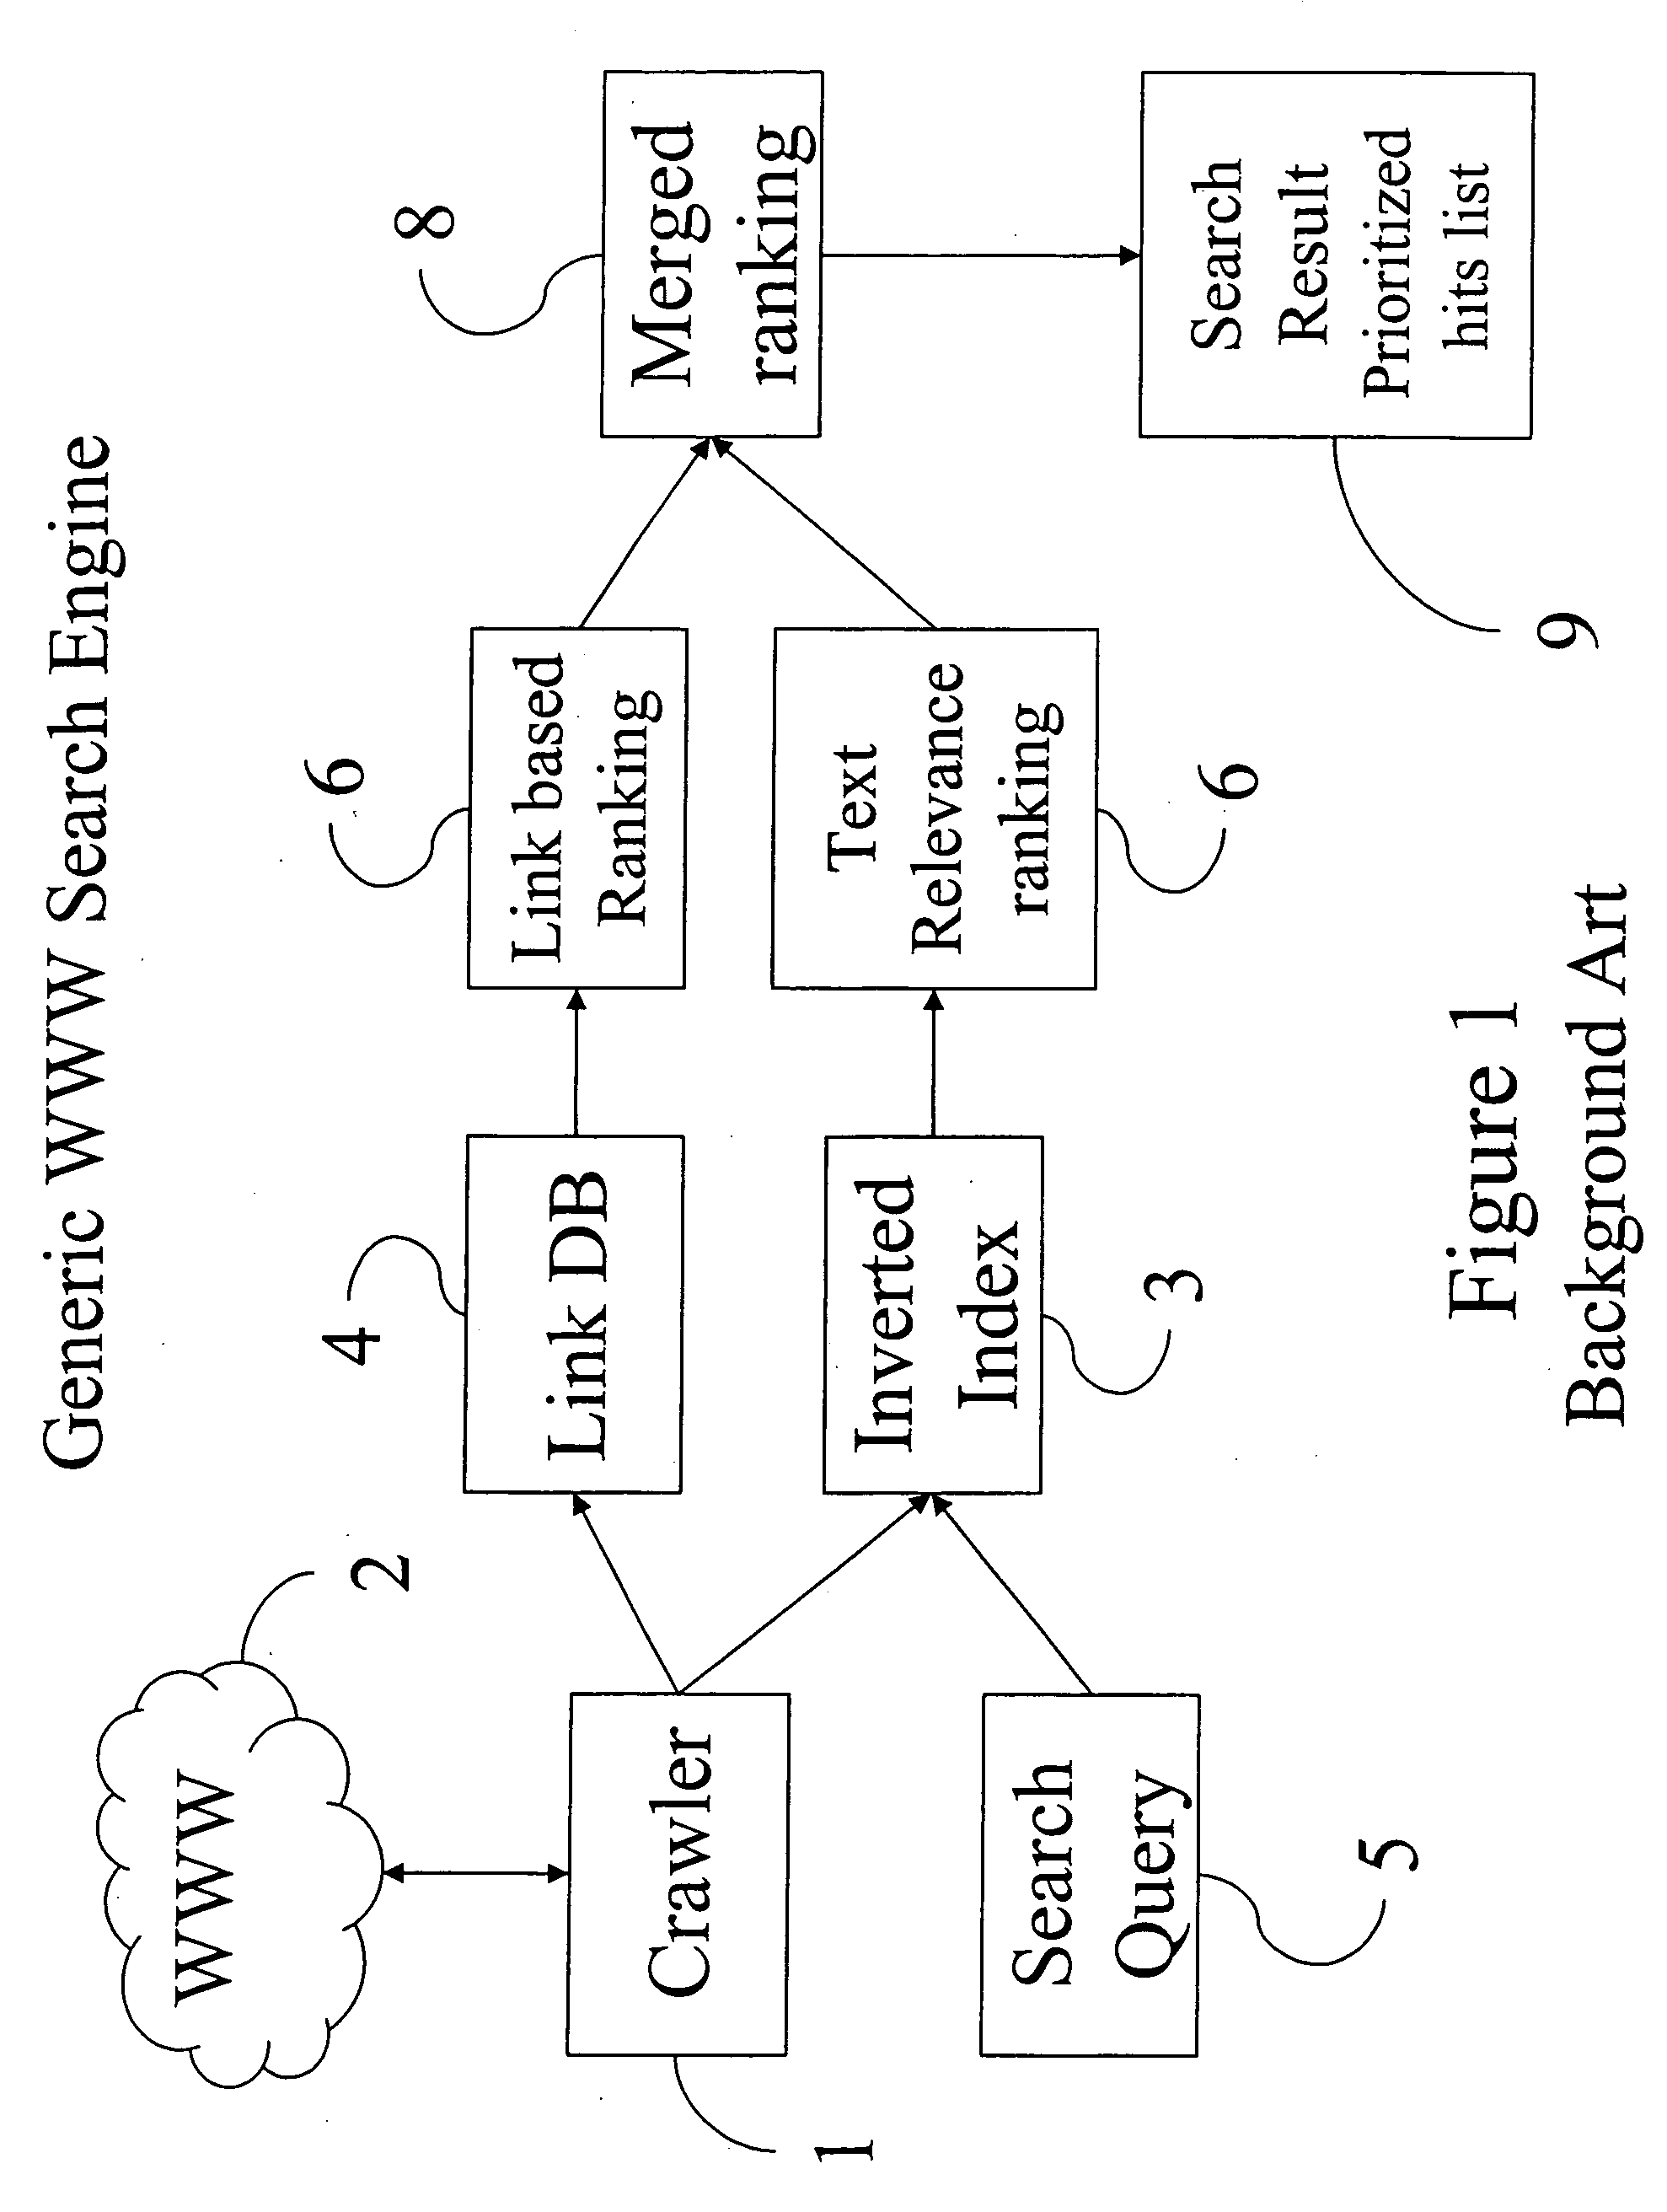 Method, system, and computer program product for ranking of documents using link analysis, with remedies for sinks